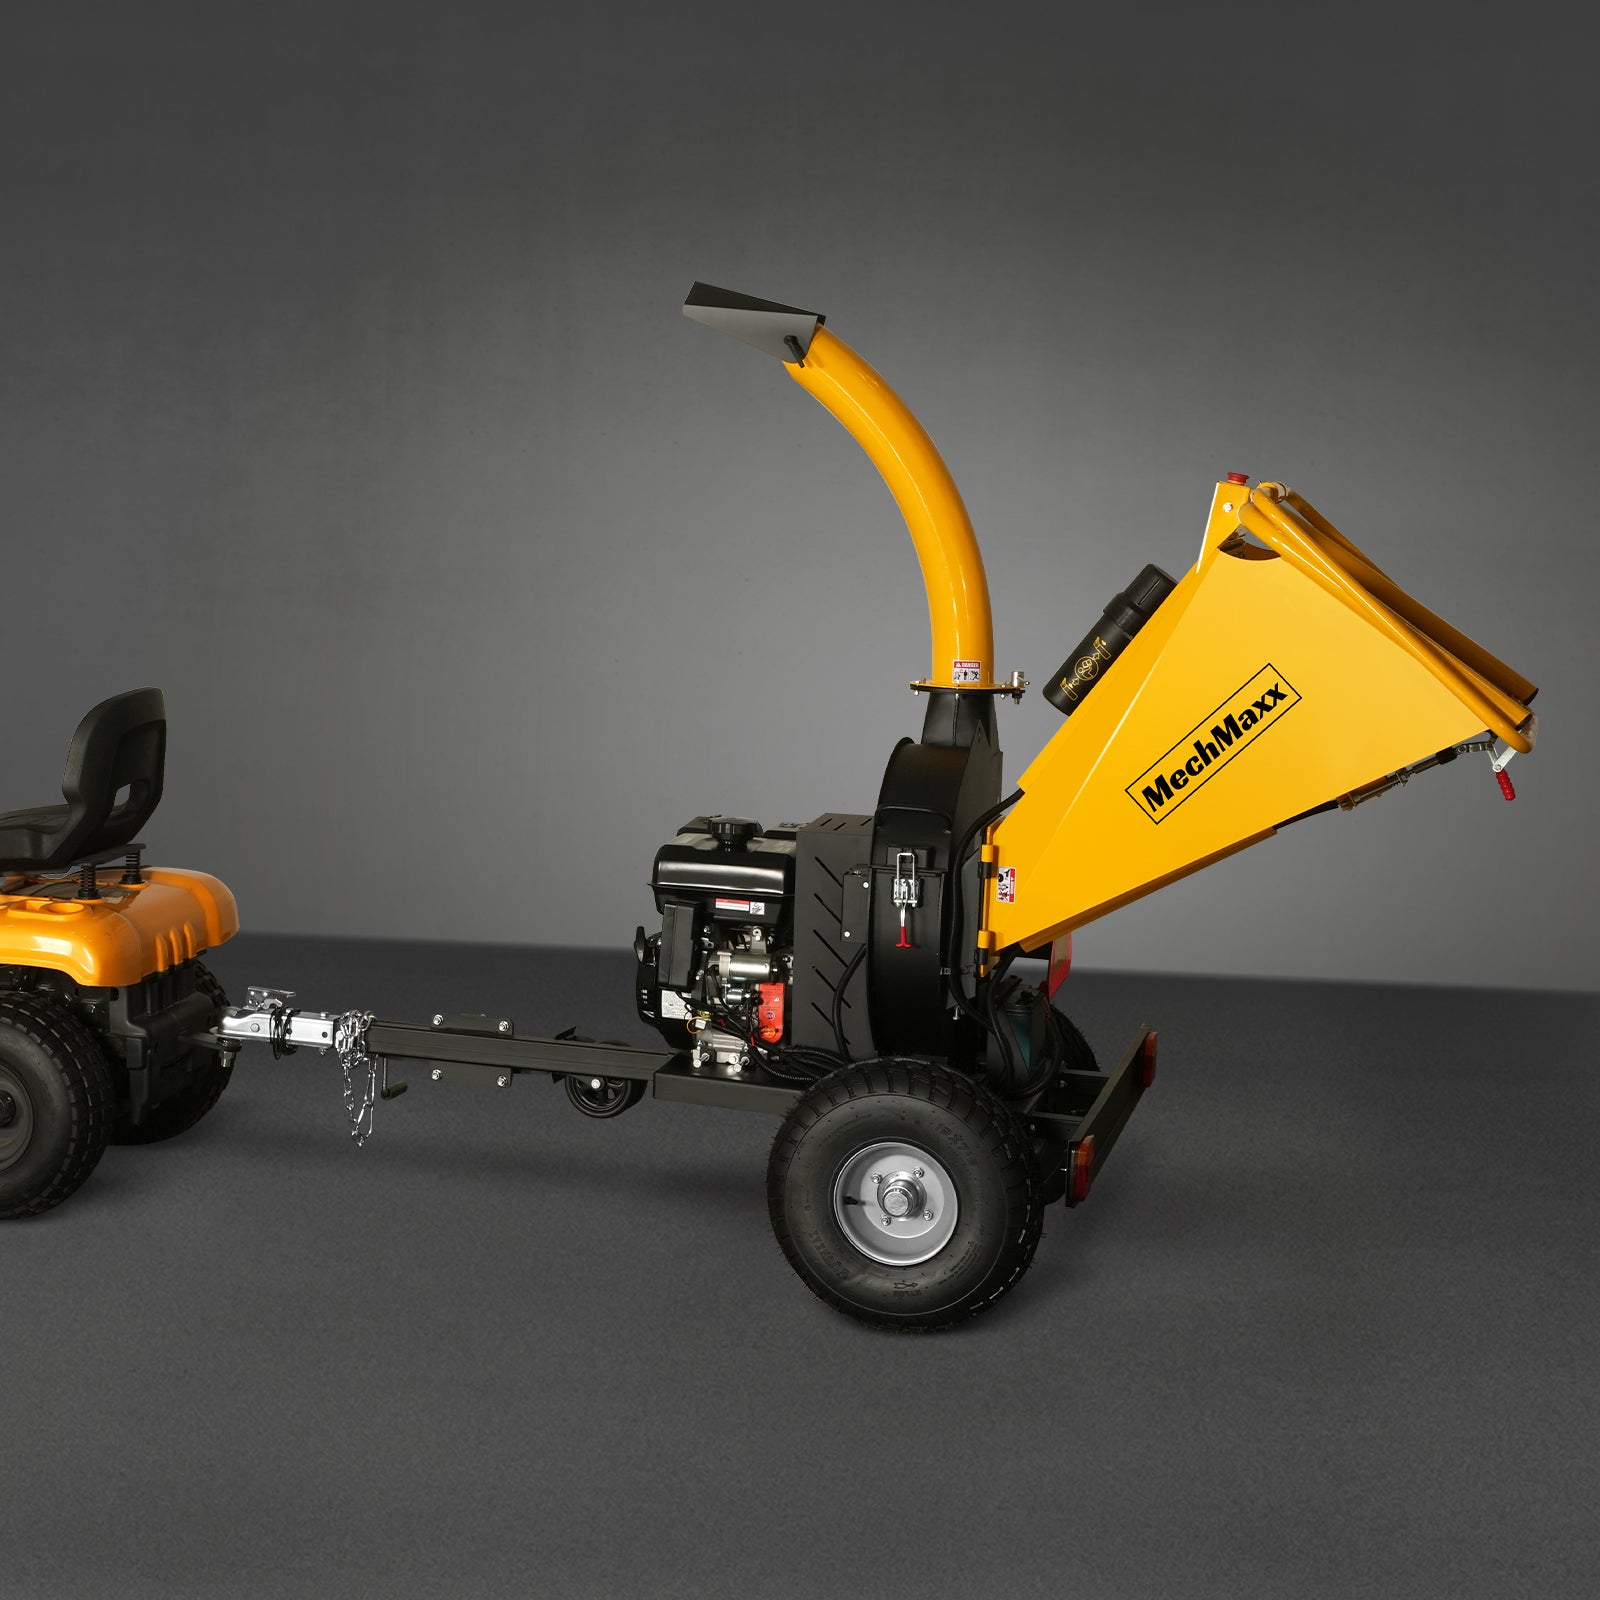 5 inch E-start DUCAR 420cc 15hp Gasoline Engine Powered Disc Wood Chipper with Taillight